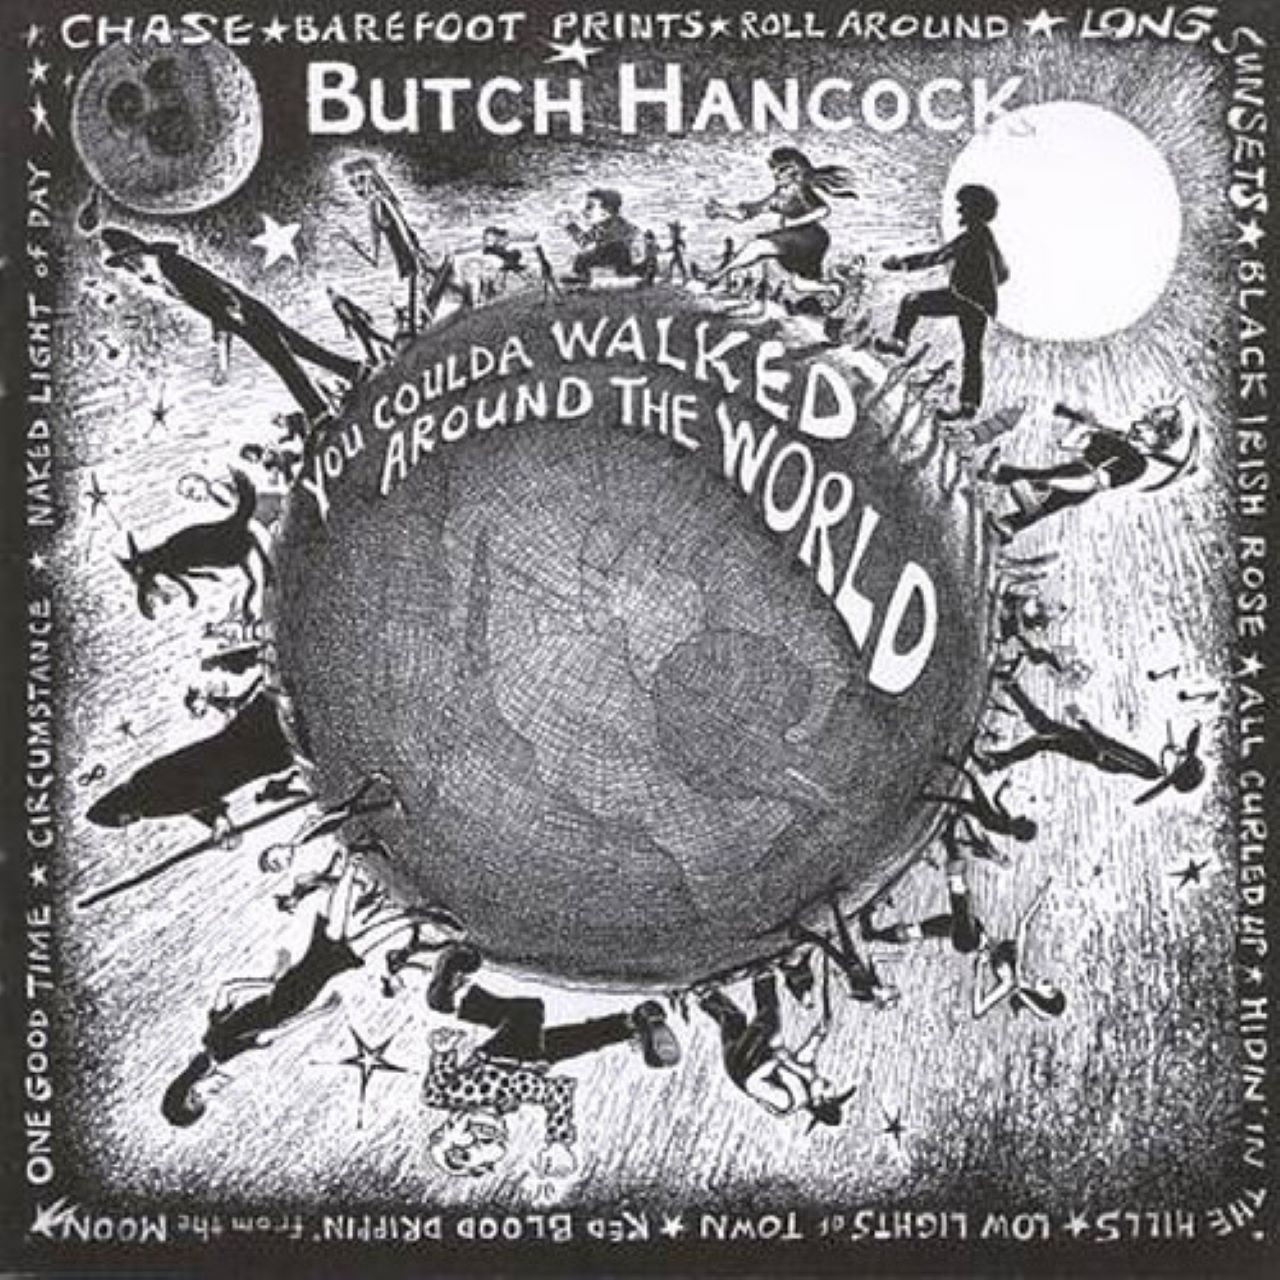 Butch Hancock - You Coulda Walked Around The World cover album